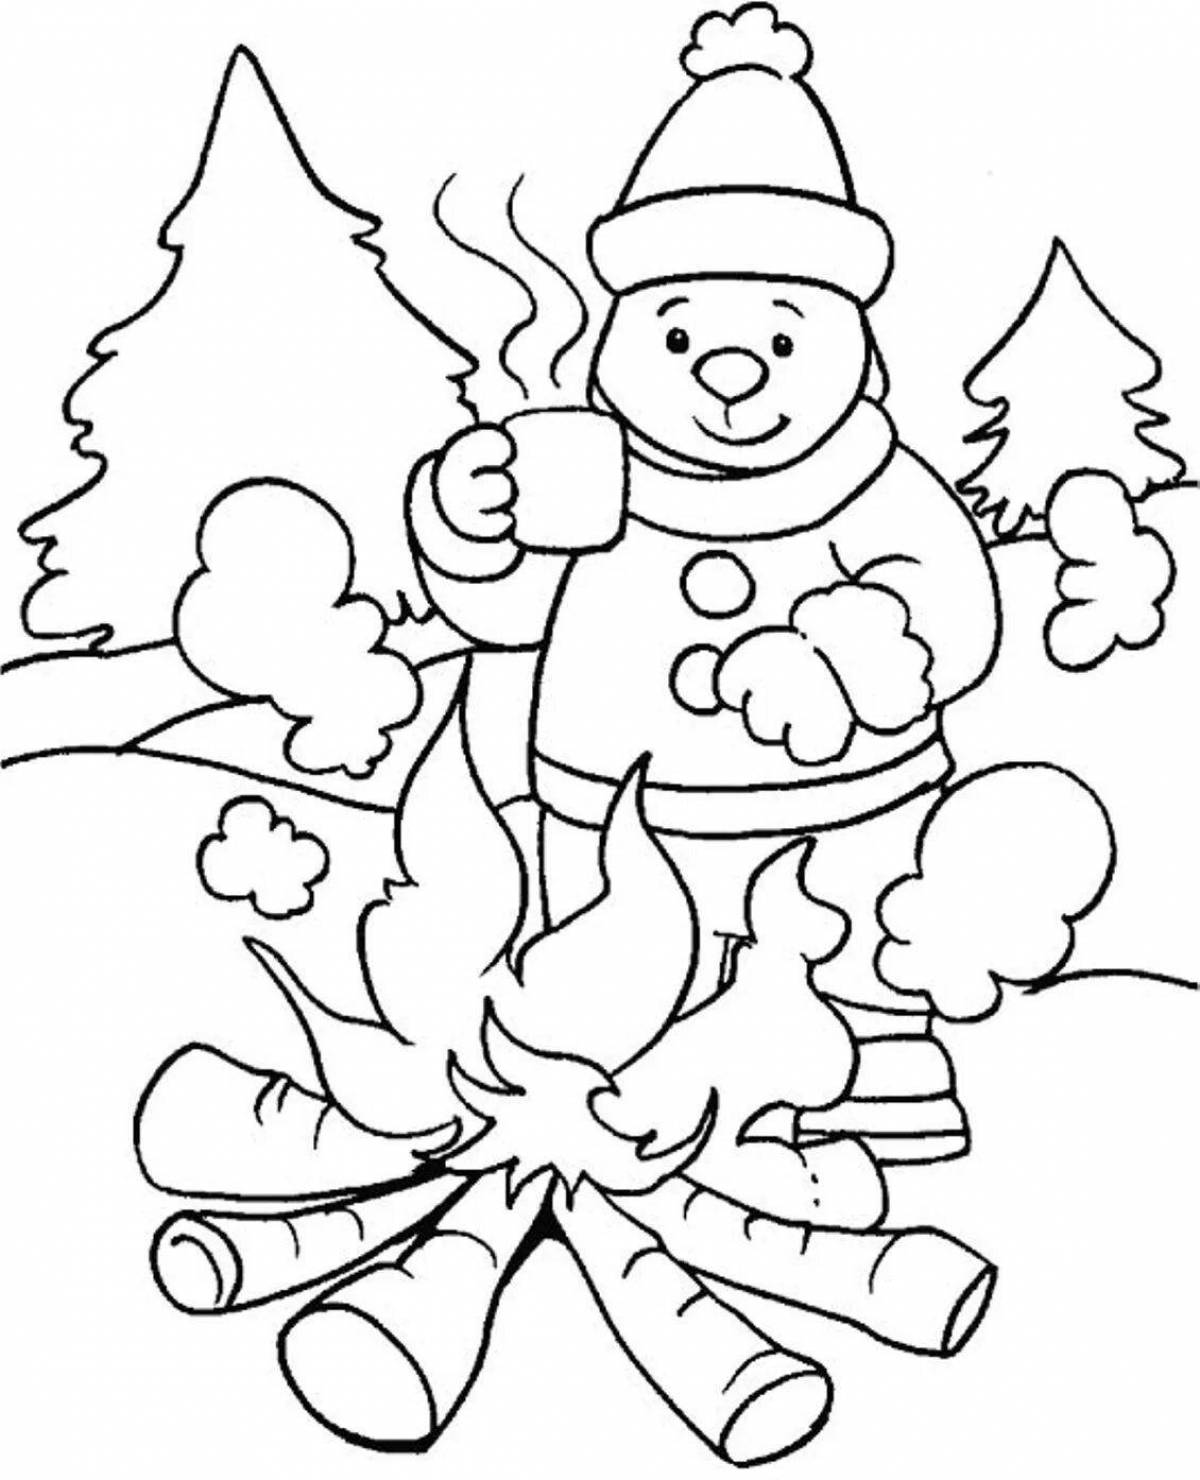 Wonderful coloring for children 3-4 years old winter new year